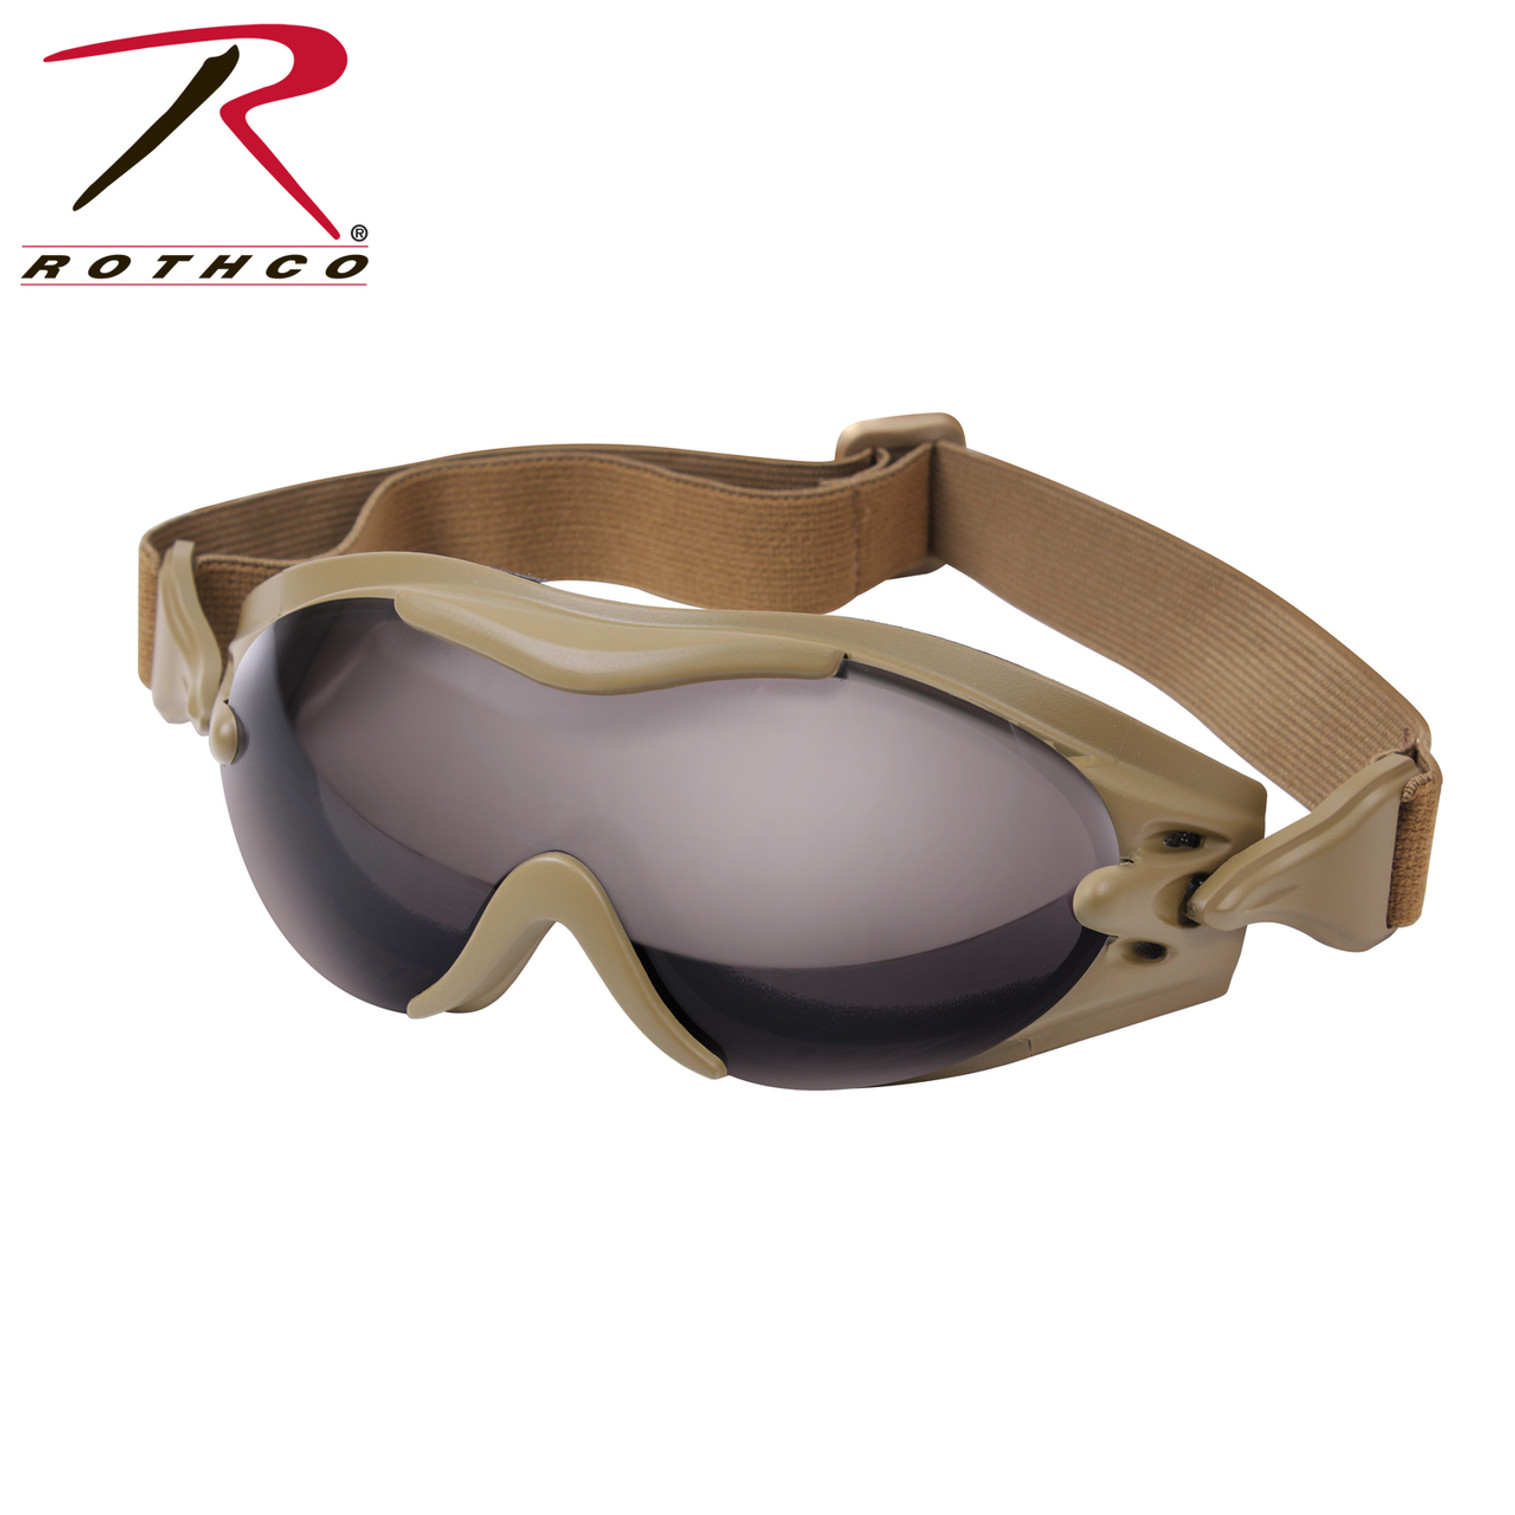 Rothco SWAT Tec Single Lens Tactical Goggle - Coyote Brown